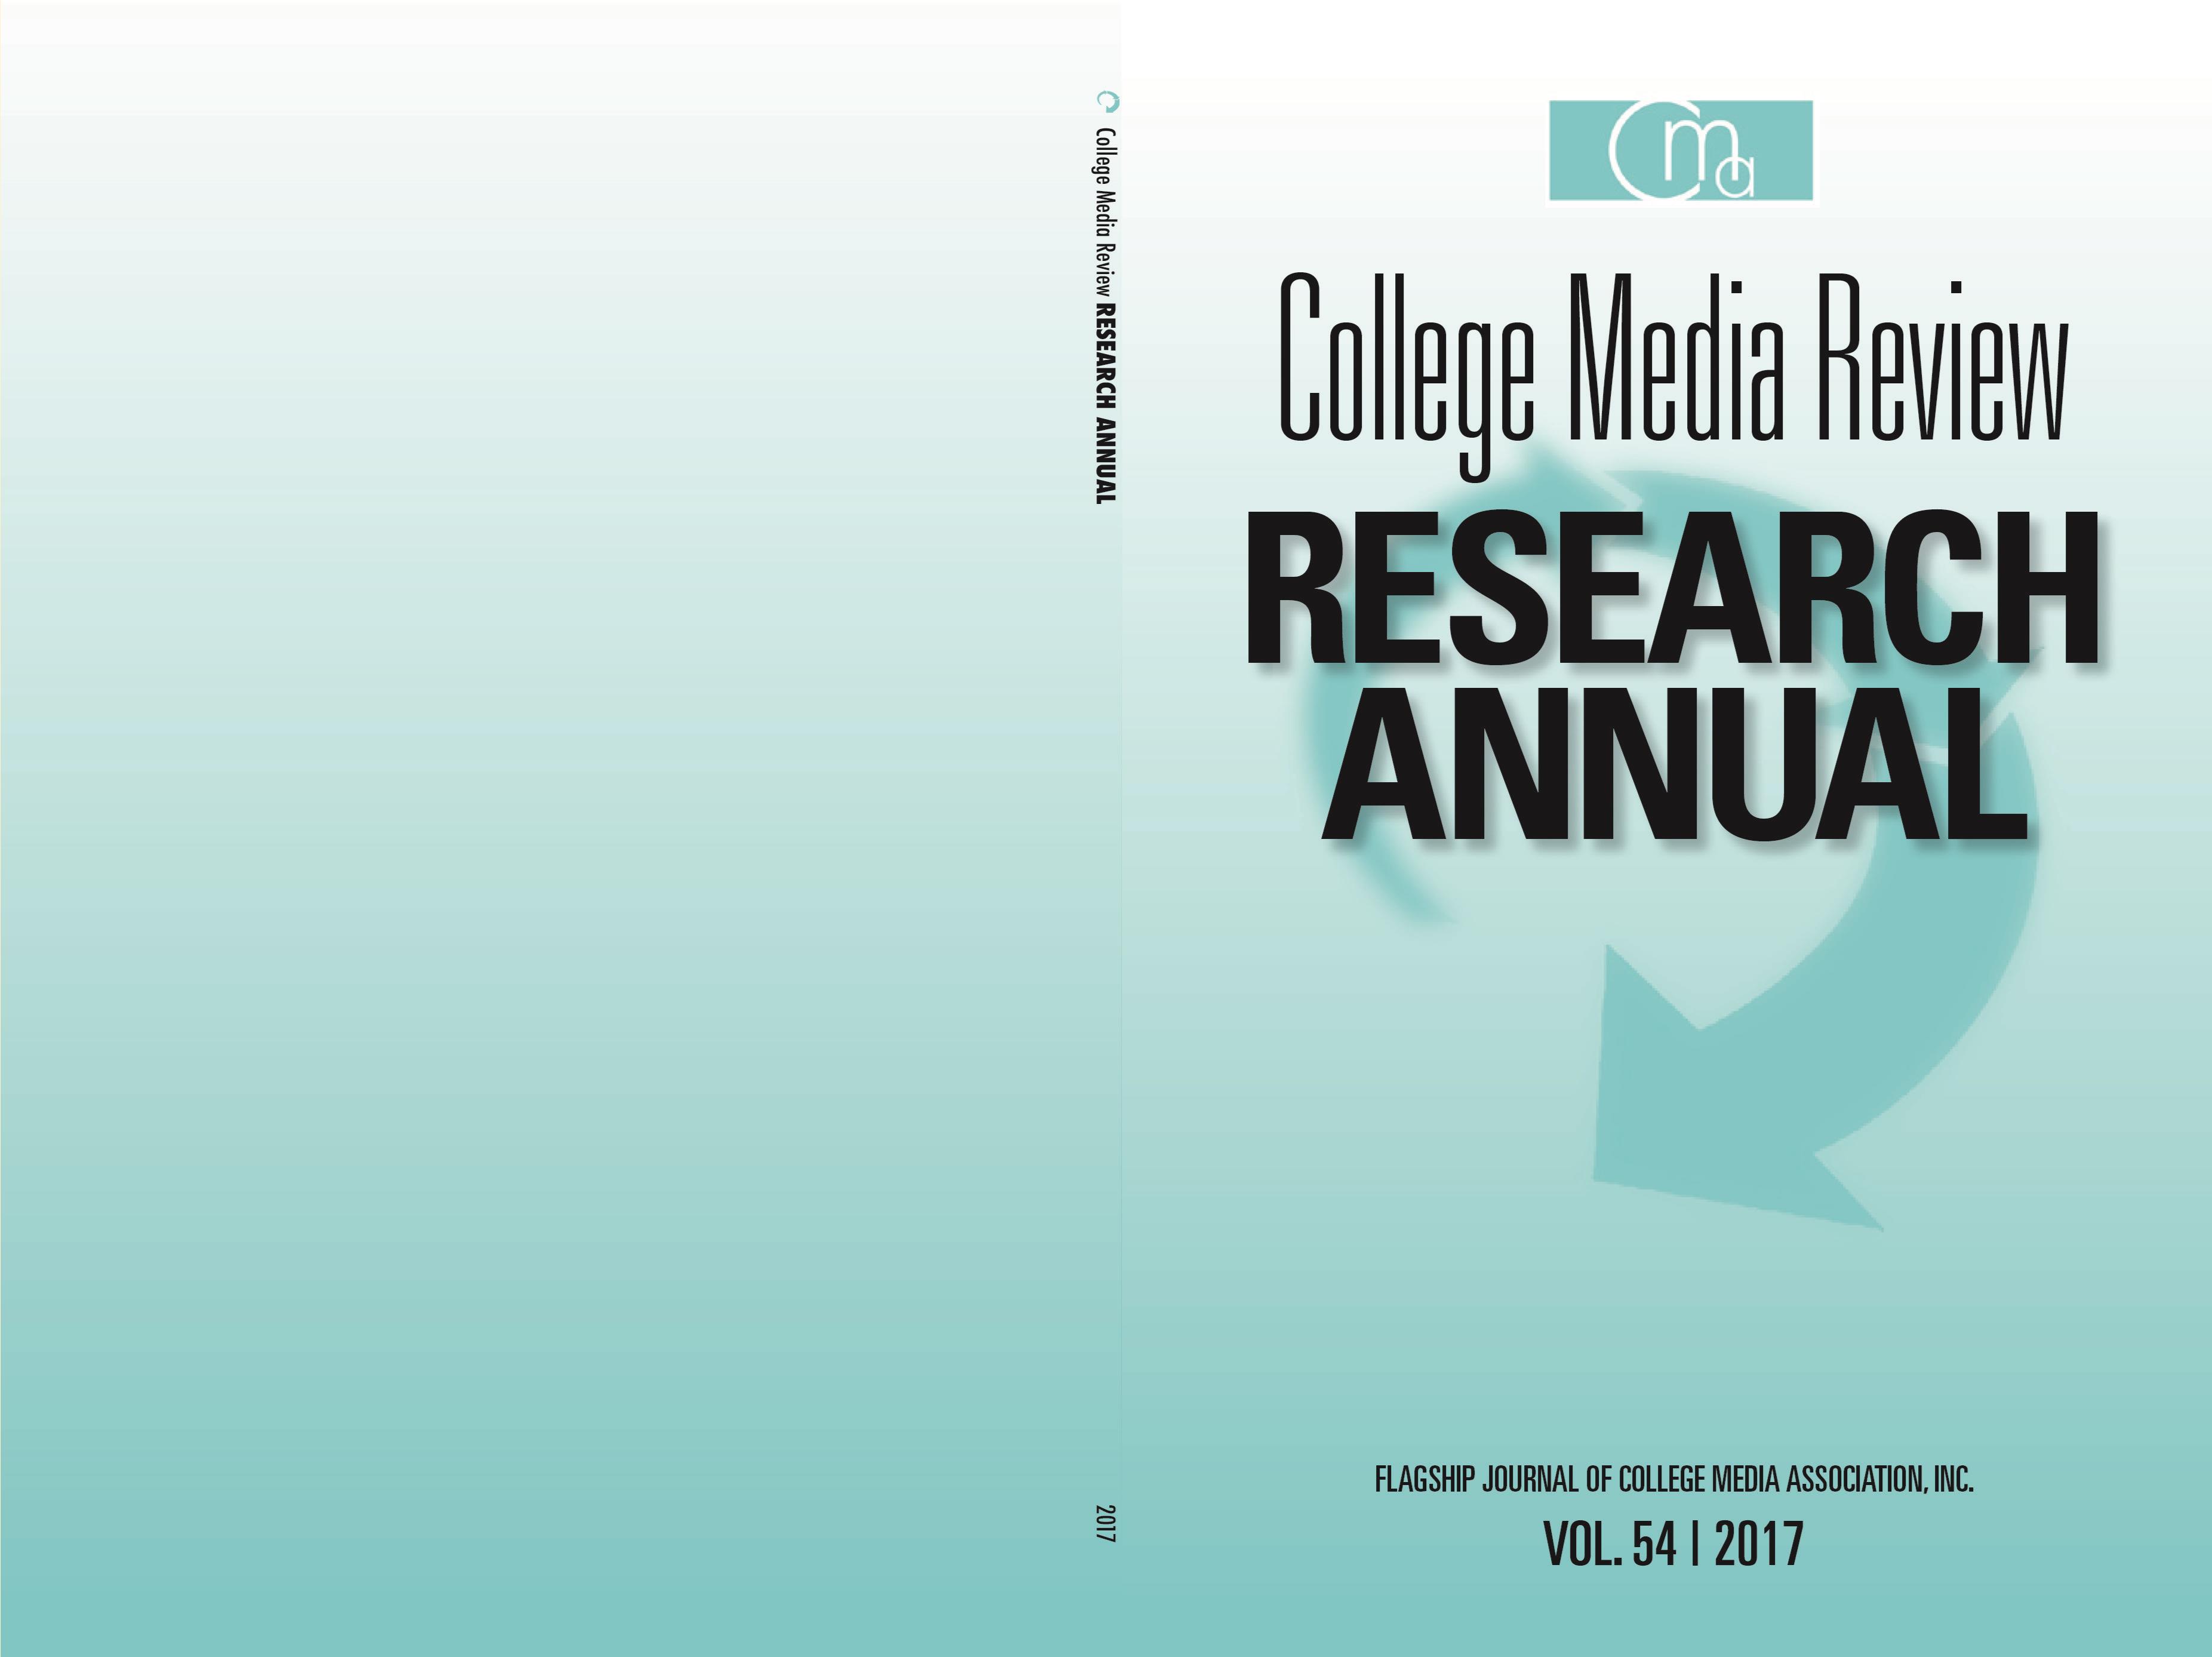 College Media Review Research Annual 2017 cover image